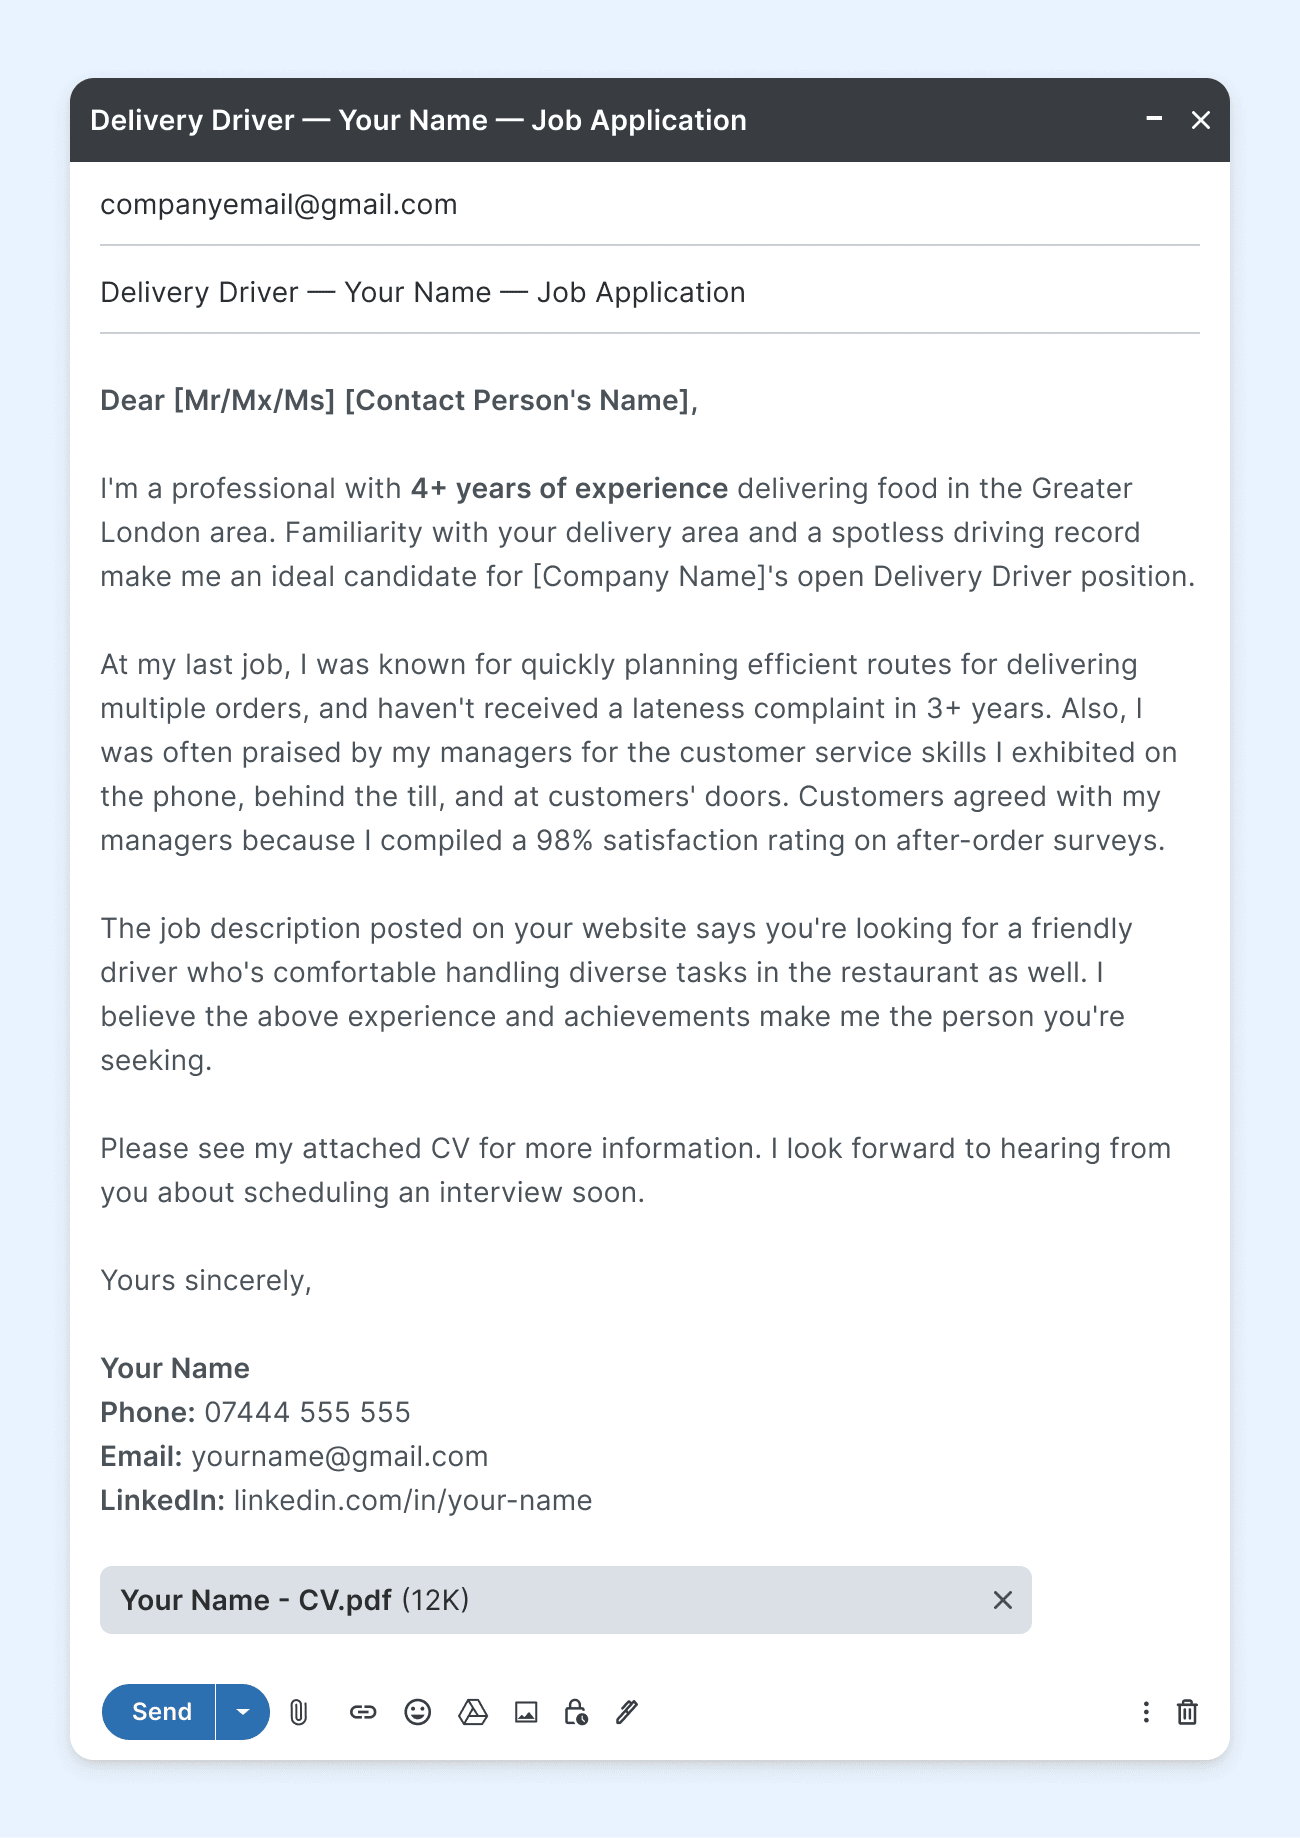 A screenshot of an email cover letter format example.